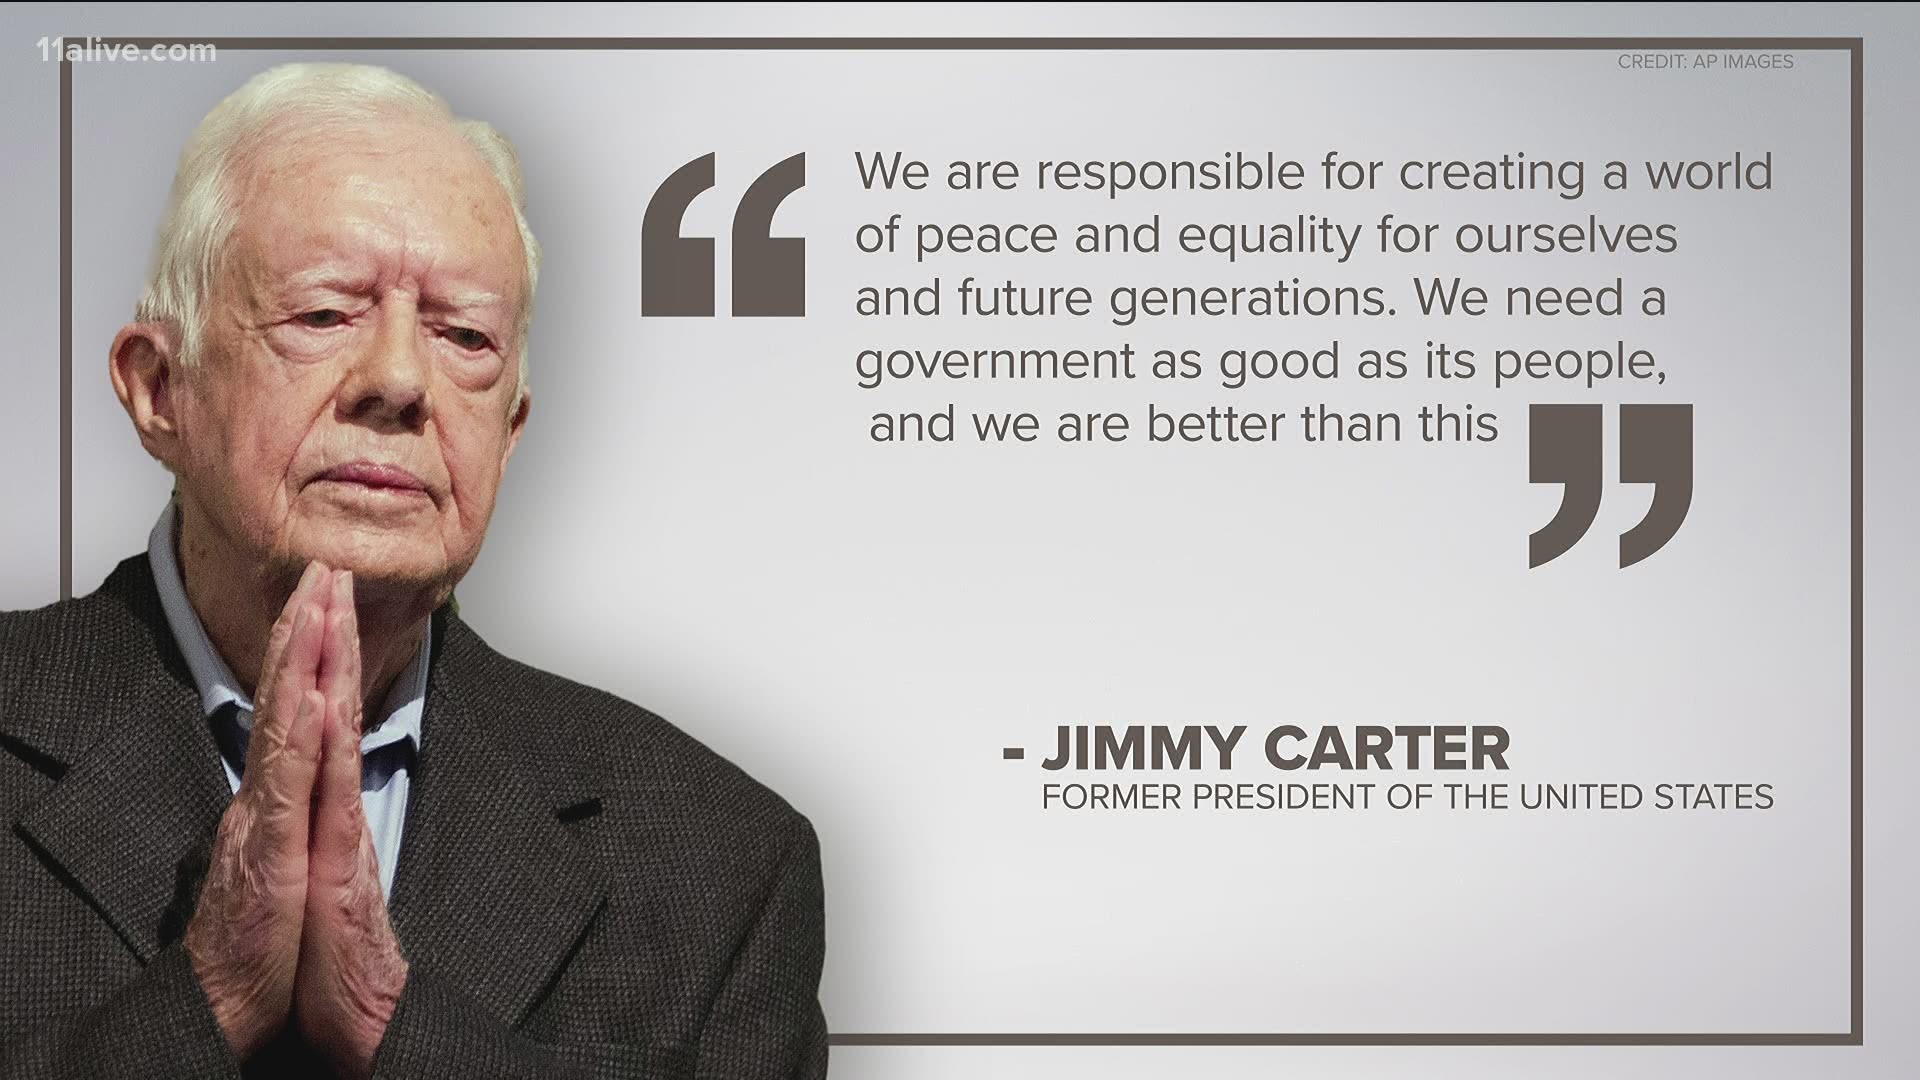 "We are responsible for creating a world of peace and equality for ourselves and future generations."